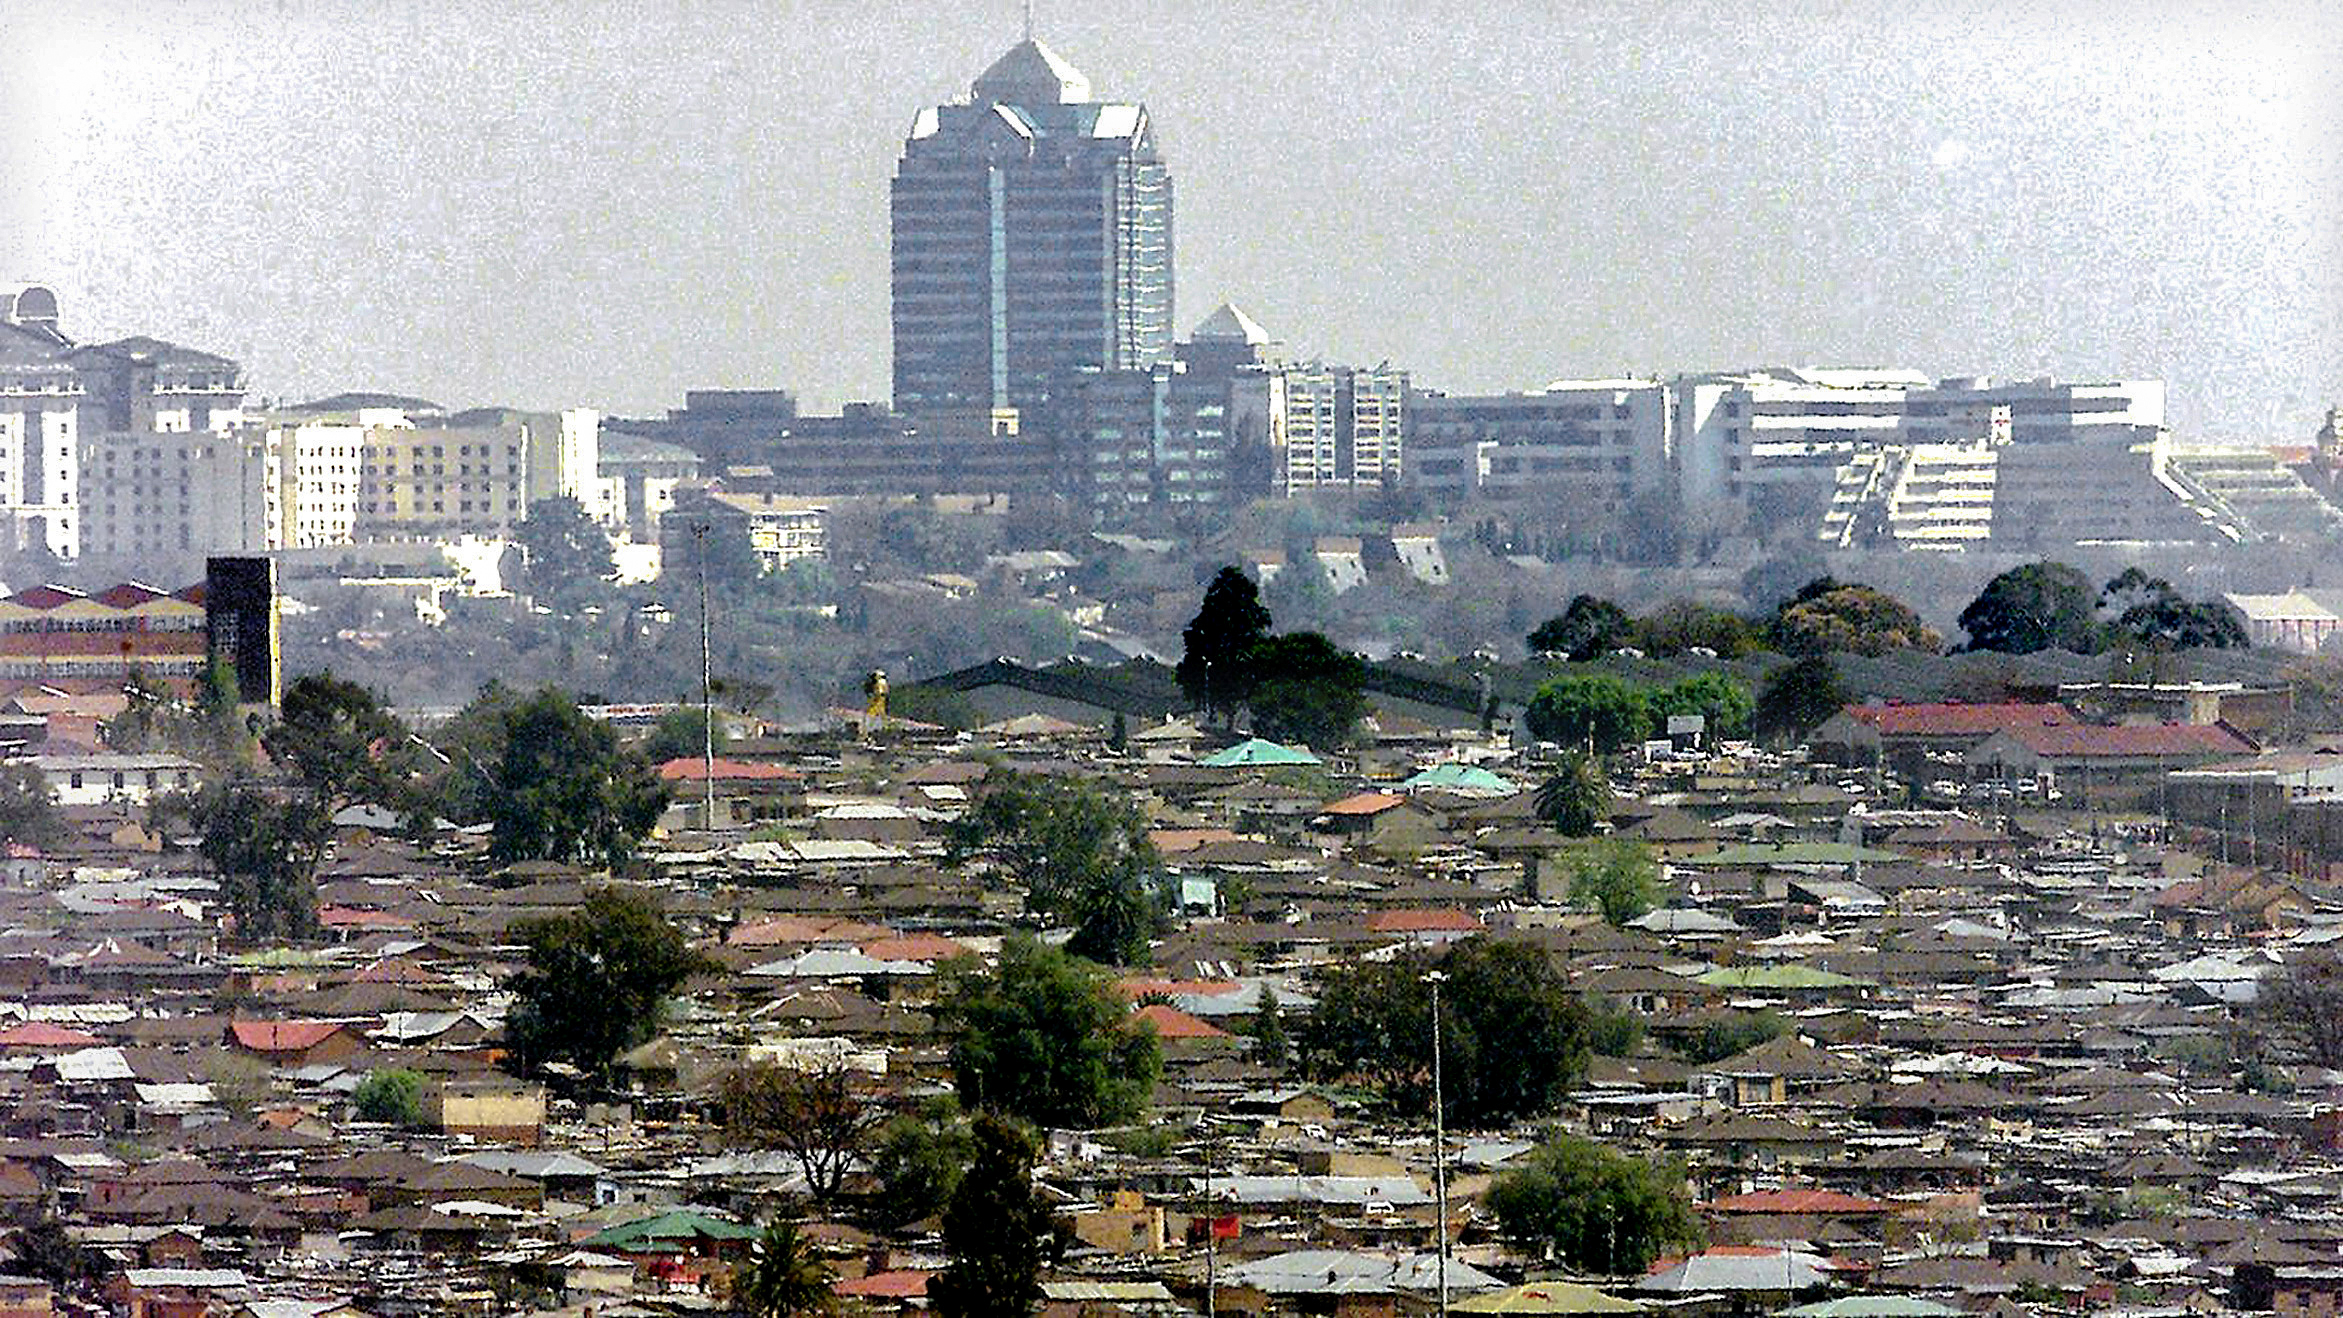 Alexandra township flanked by the far more affluent Sandton on the skyline